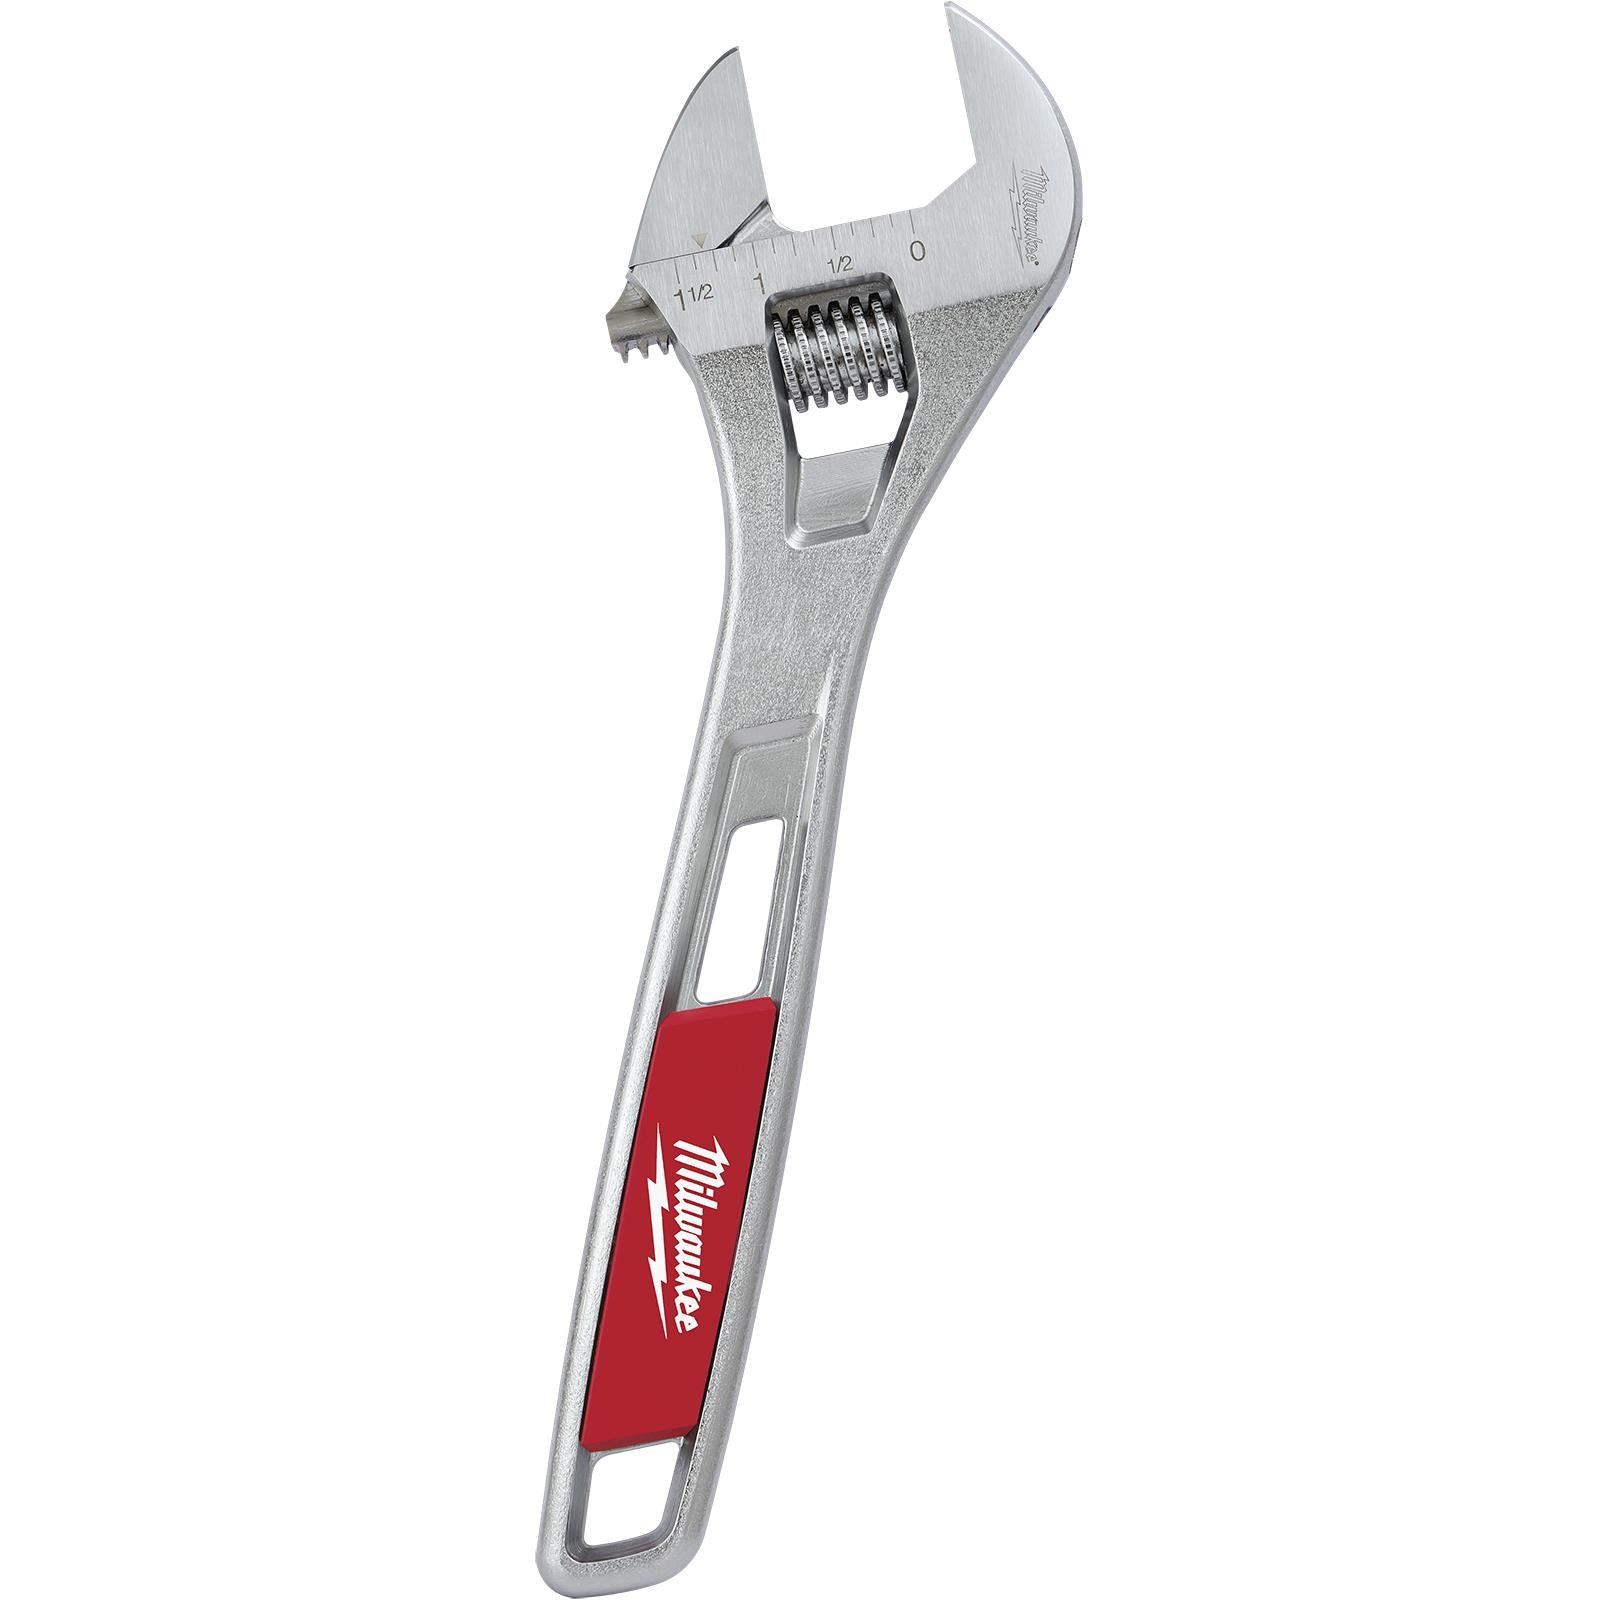 Milwaukee Adjustable Wrench 250mm Jaw Opening 36.5mm